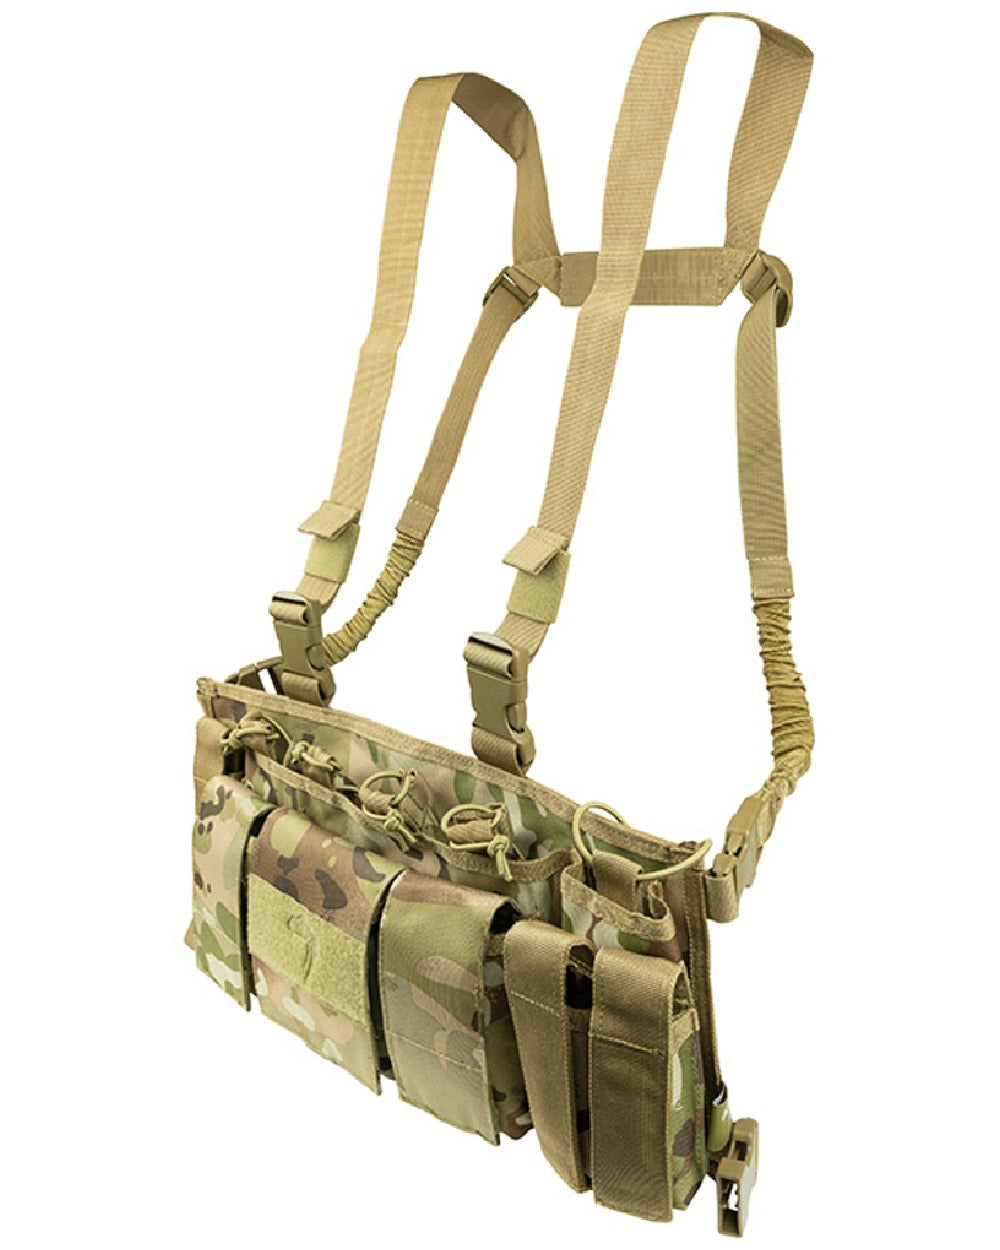 Viper Special Ops Chest Rig in VCAM 